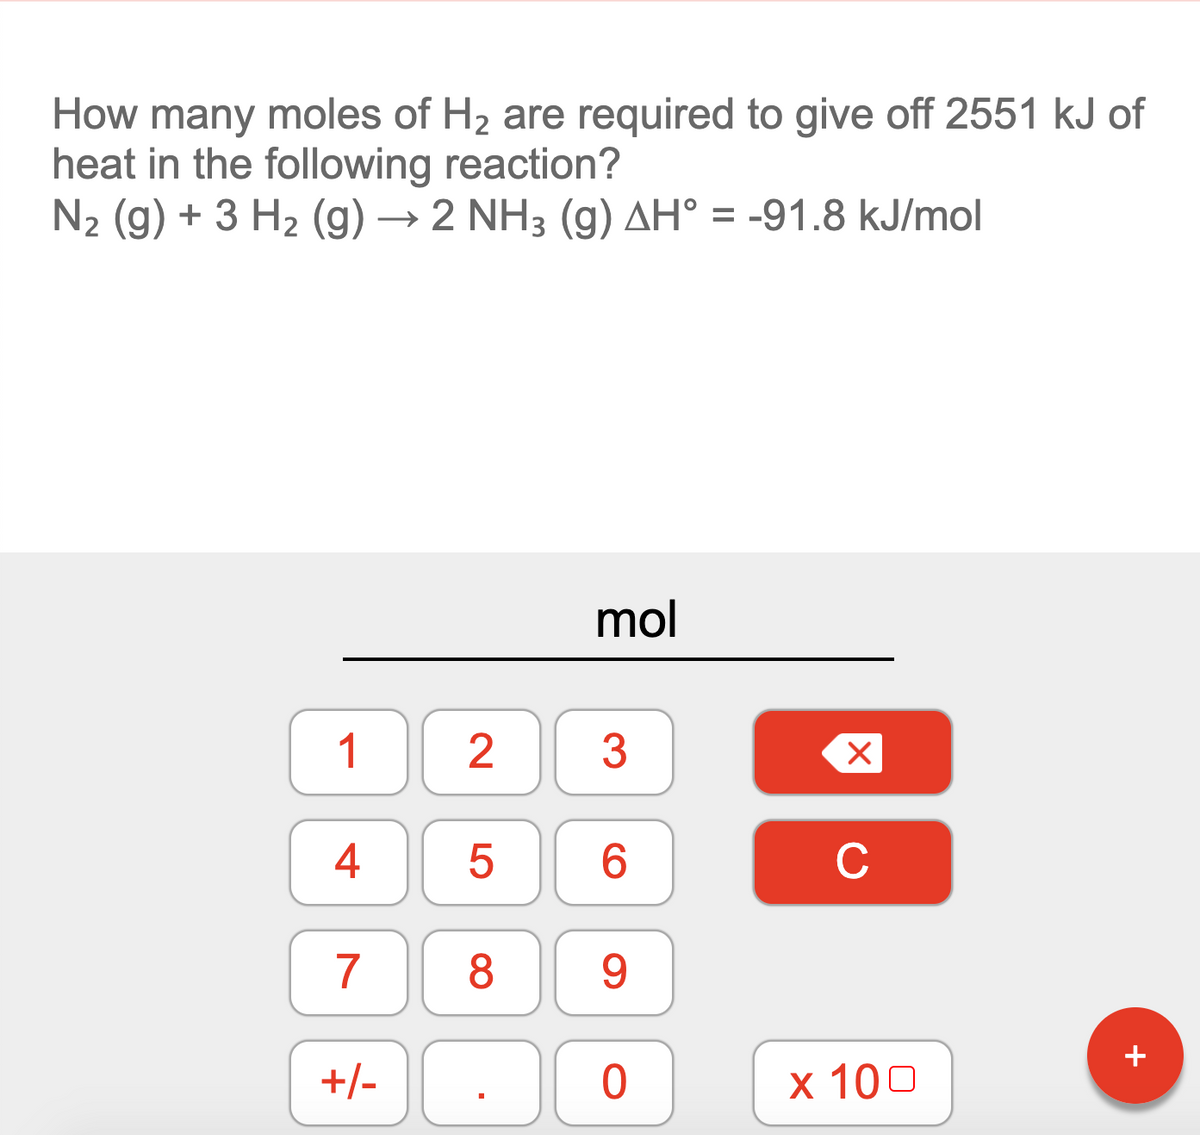 How many moles of H2 are required to give off 2551 kJ of
heat in the following reaction?
N2 (g) + 3 H2 (g) → 2 NH3 (g) AH° = -91.8 kJ/mol
mol
1
3
4
6.
C
7
8
9
+/-
х 100
LO
